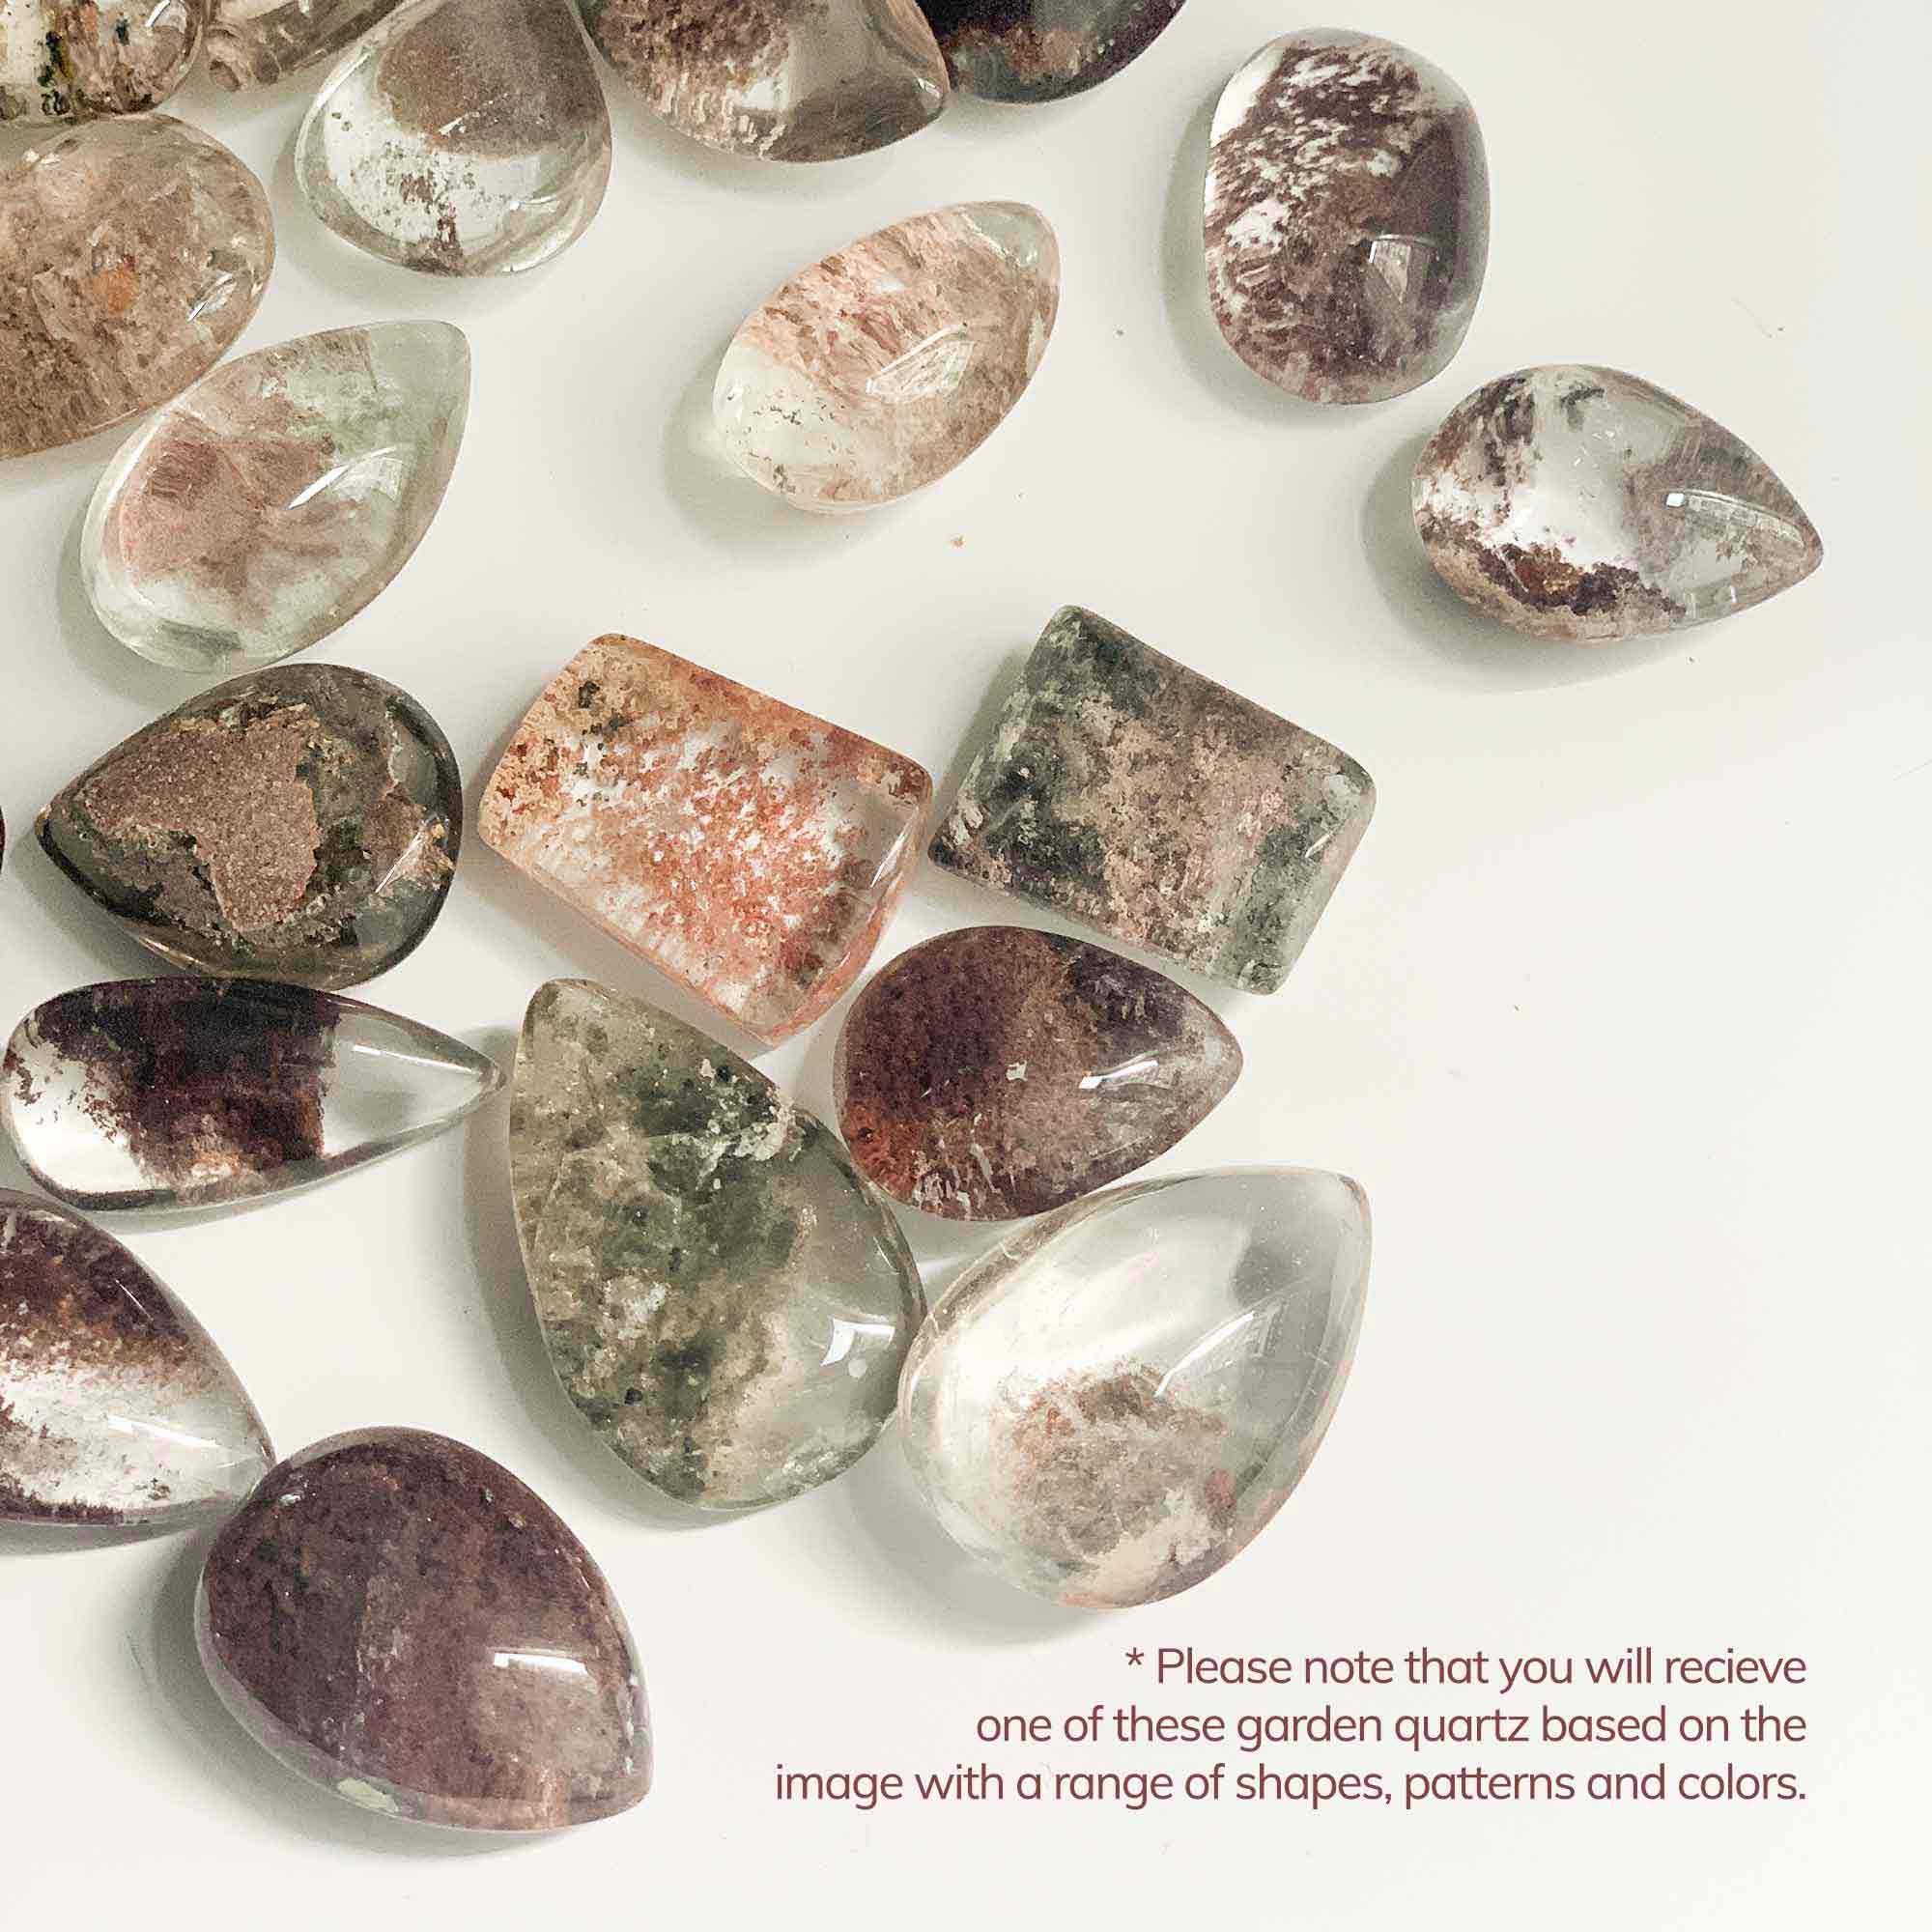 several patterns, colors and sizes of garden quartz crystals